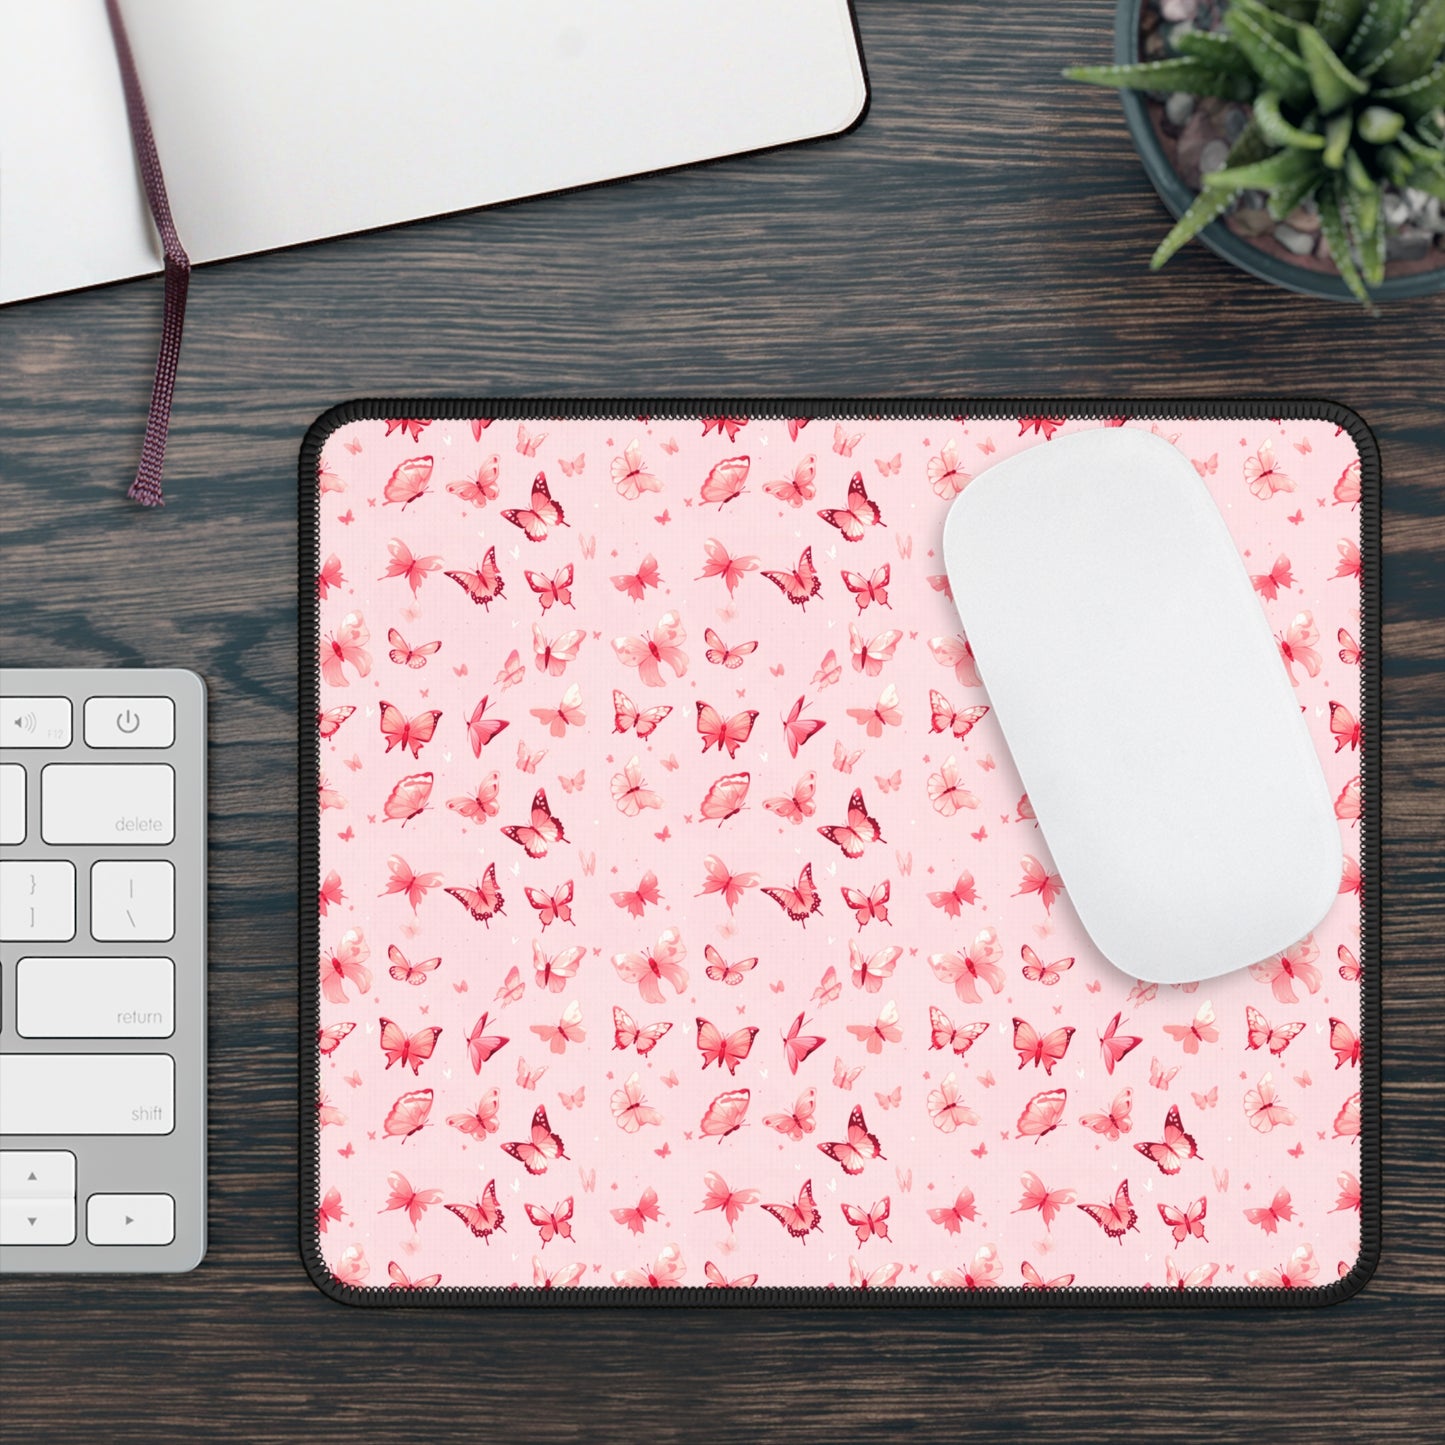 Whimsical Pink Butterflies Mouse Pad